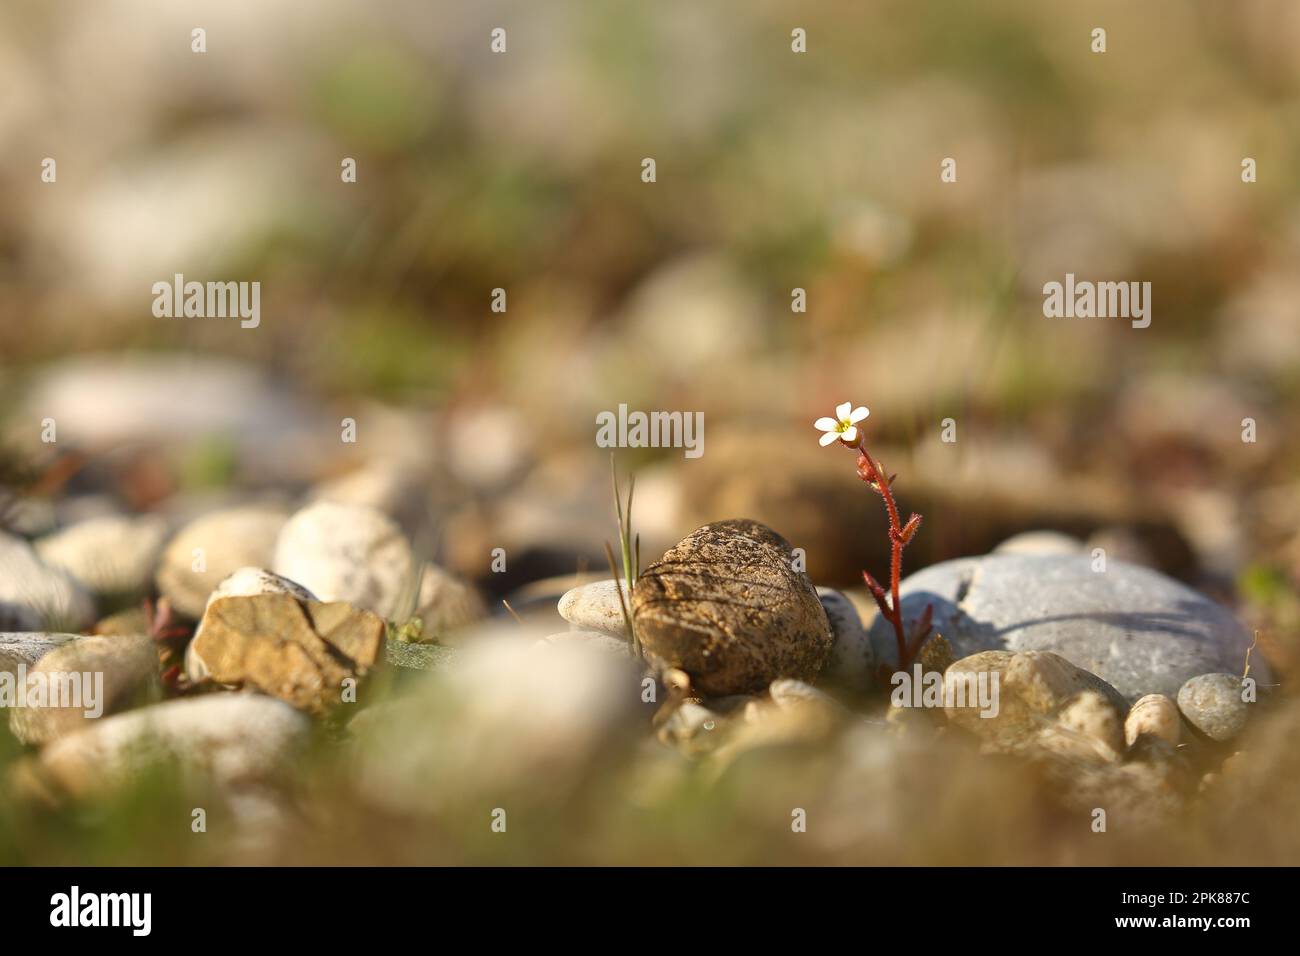 Small white flower growing between rocky pebbles Stock Photo